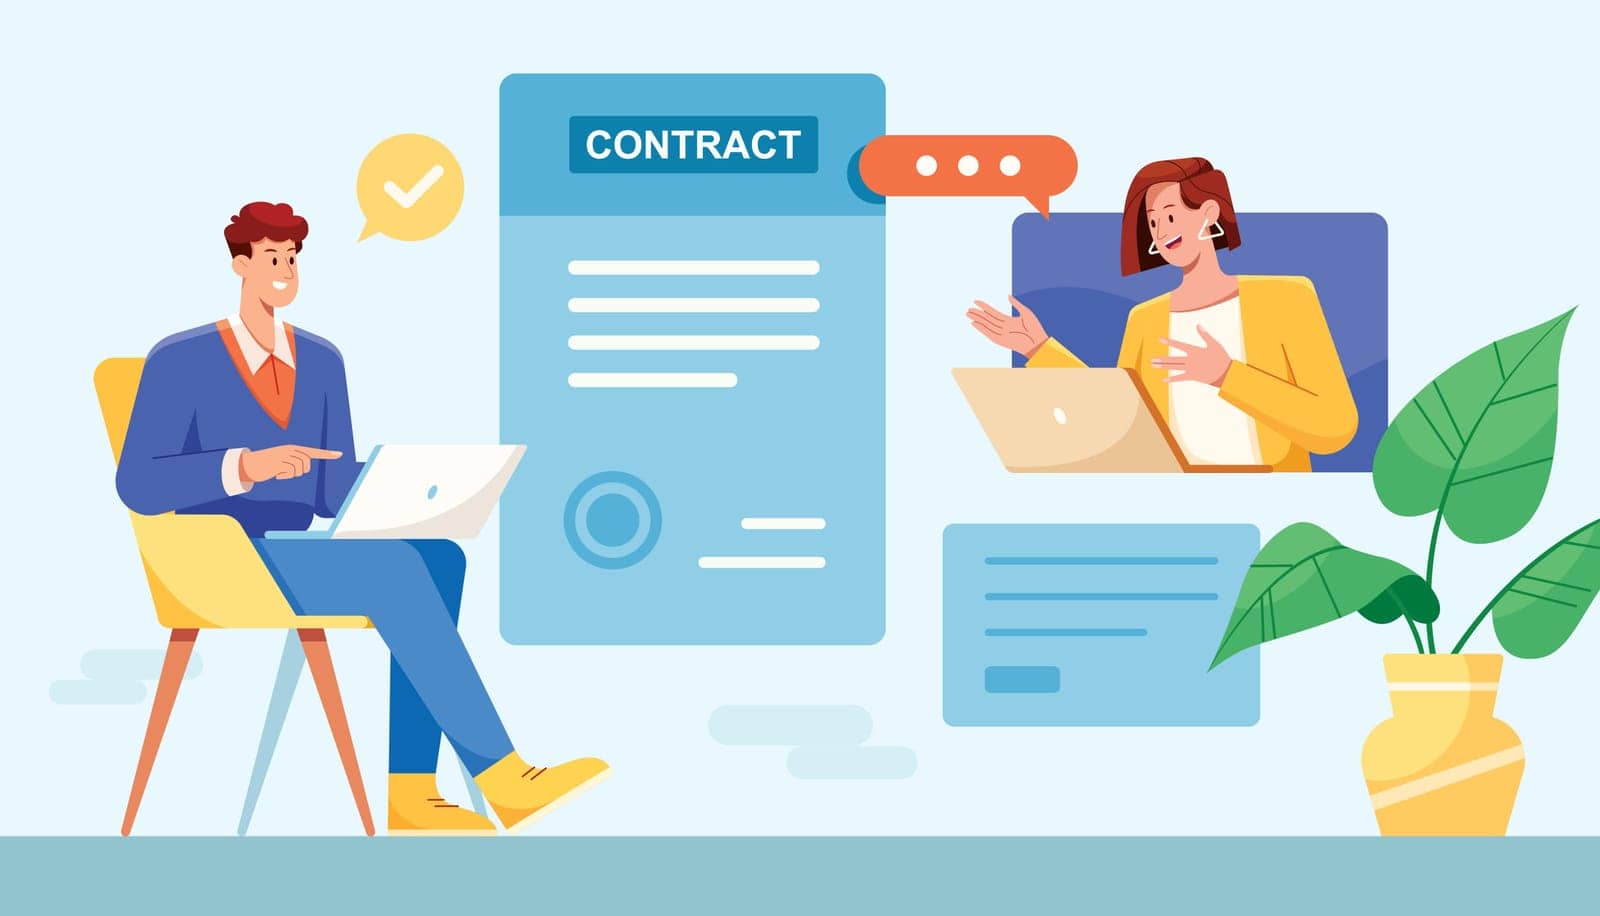 Flat design illustration with 2 people signing contract online.